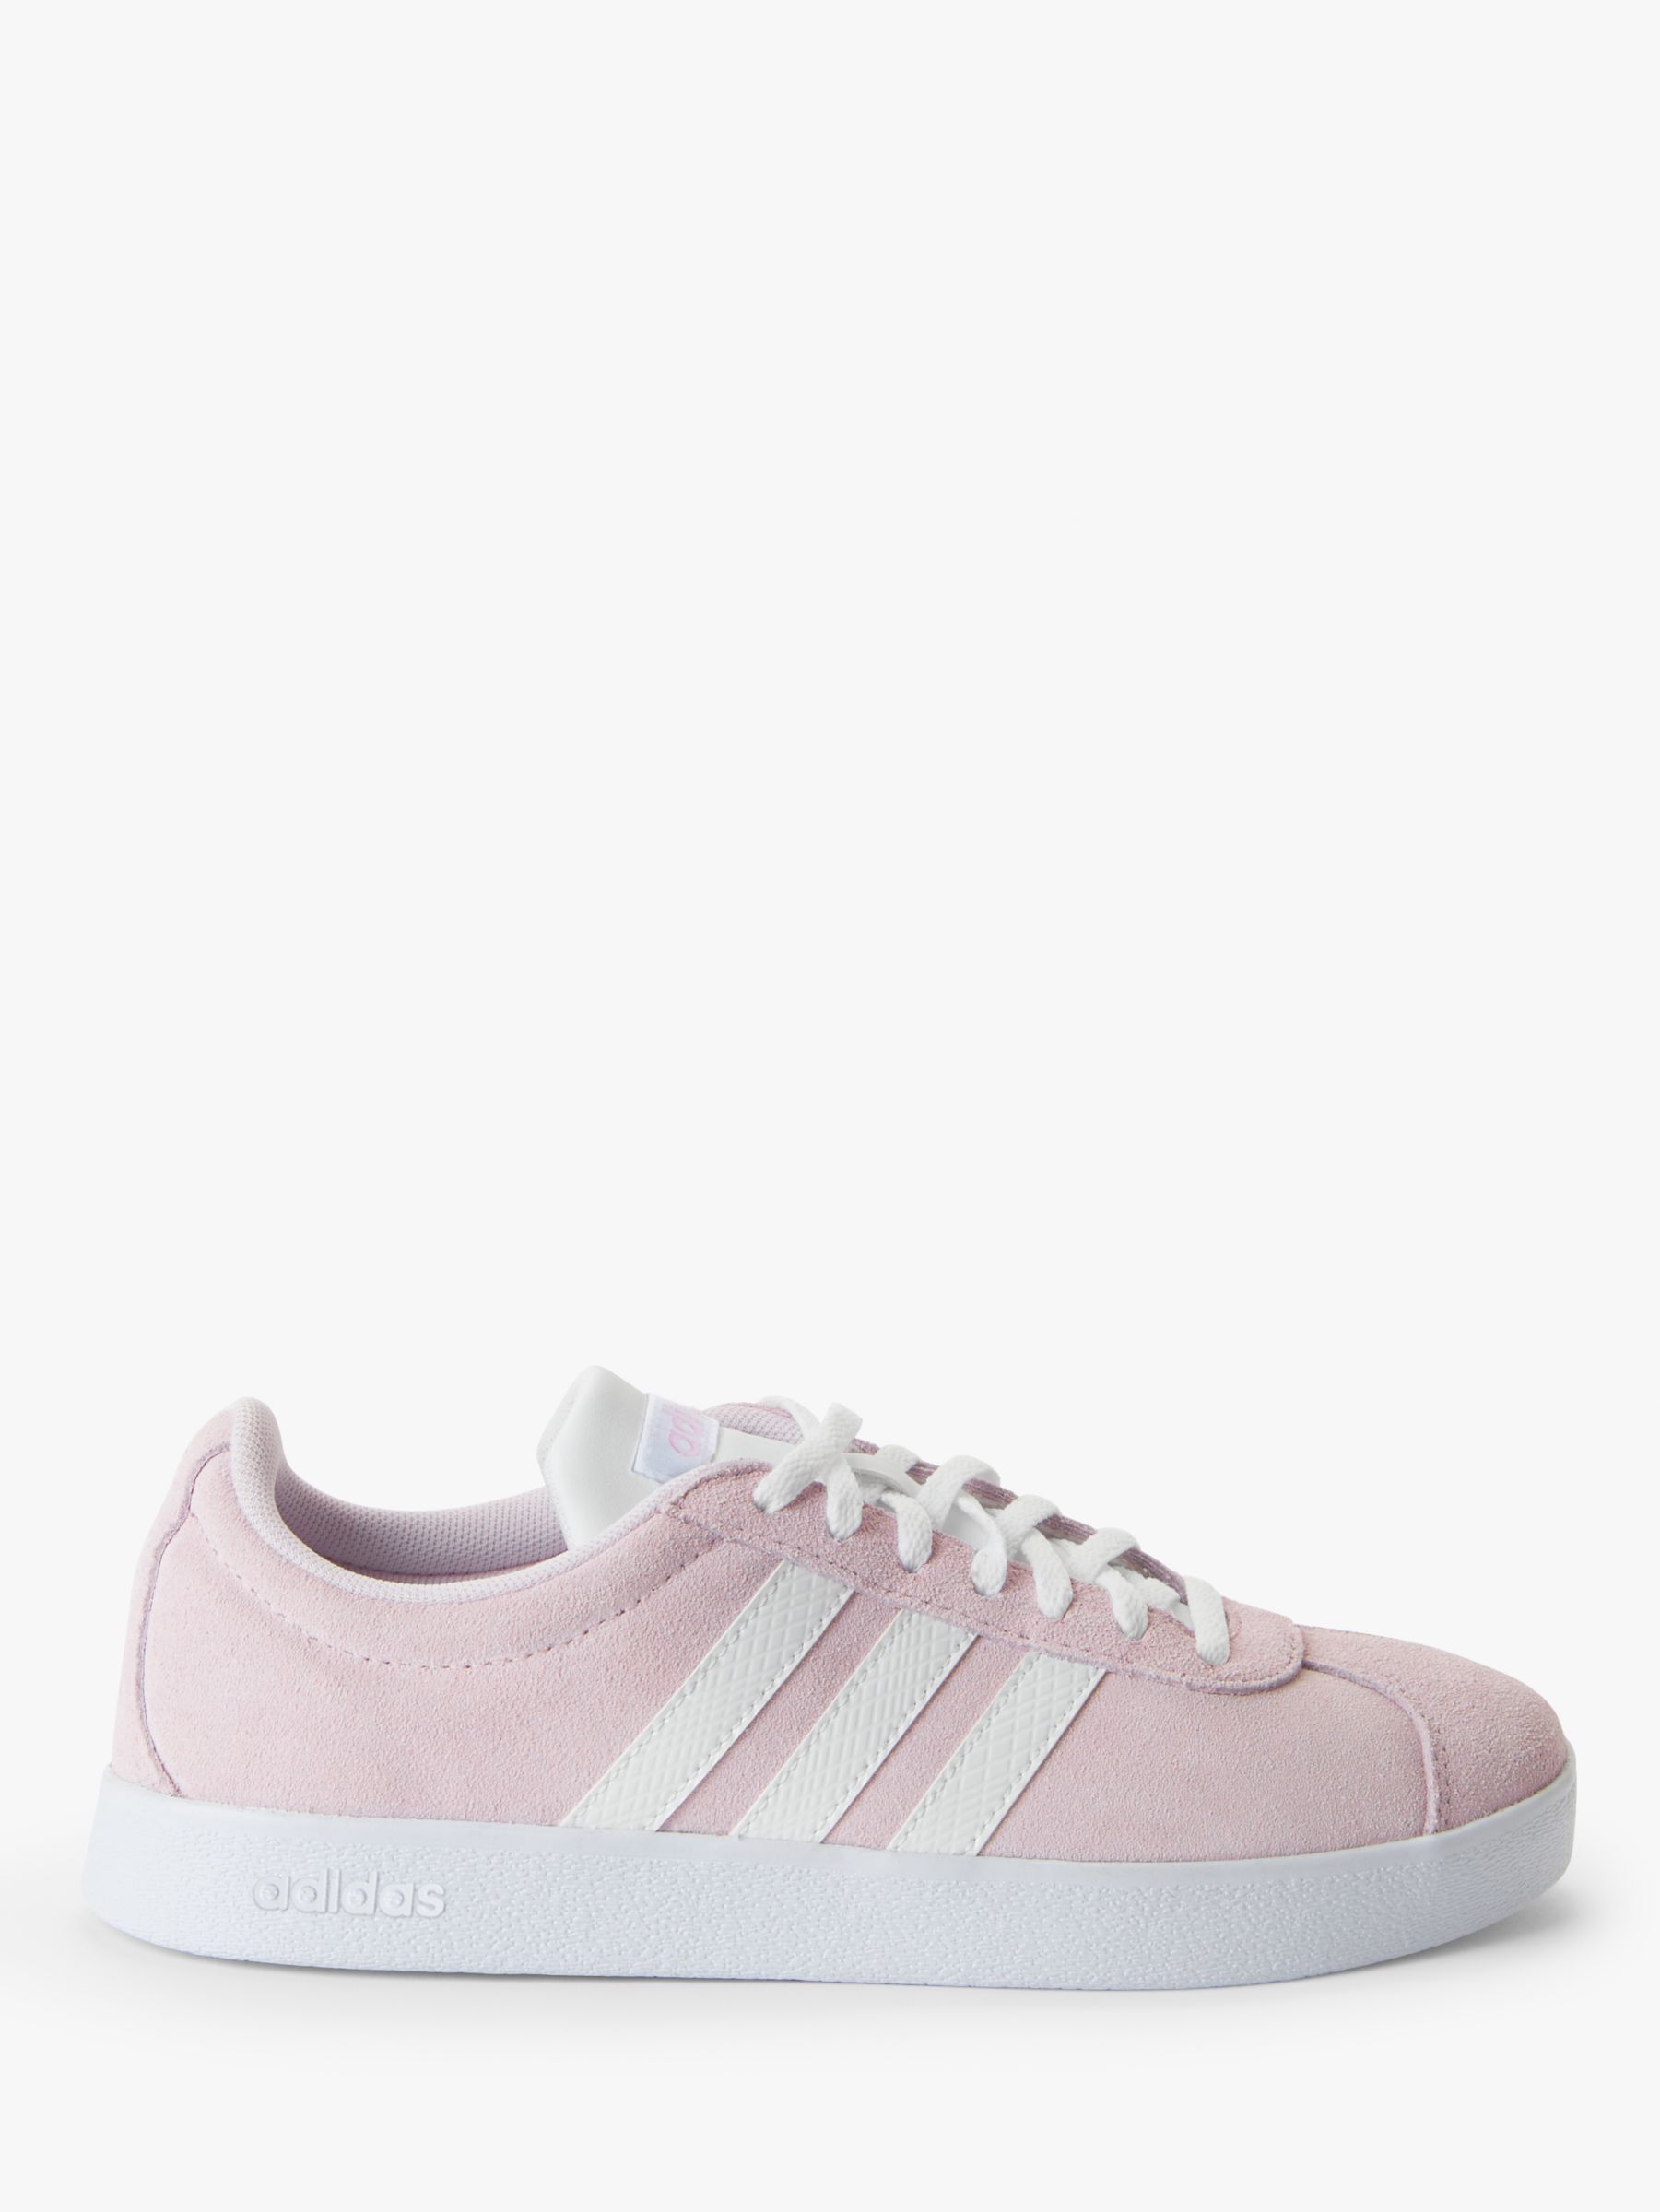 womens adidas court trainers